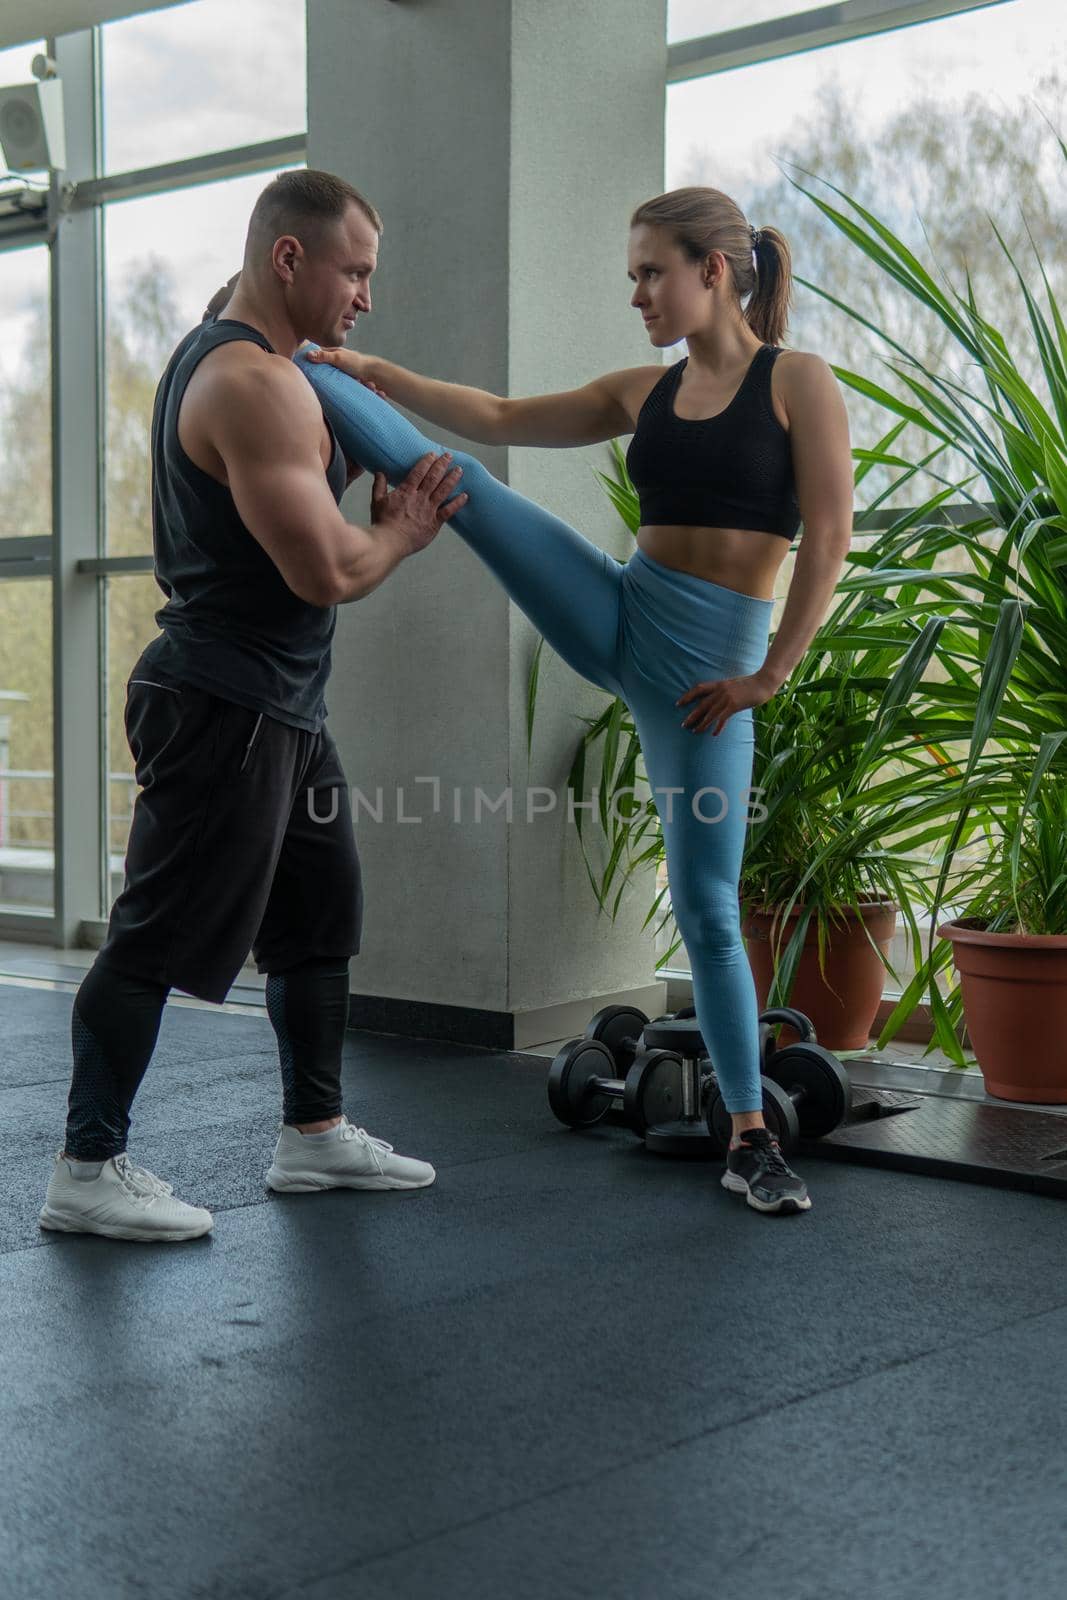 Trainer personal stretching twine healthy leg sport fitness gym lifestyle, for coach athlete in flexibility and club attractive, girl care. Outfit instructor female, by 89167702191